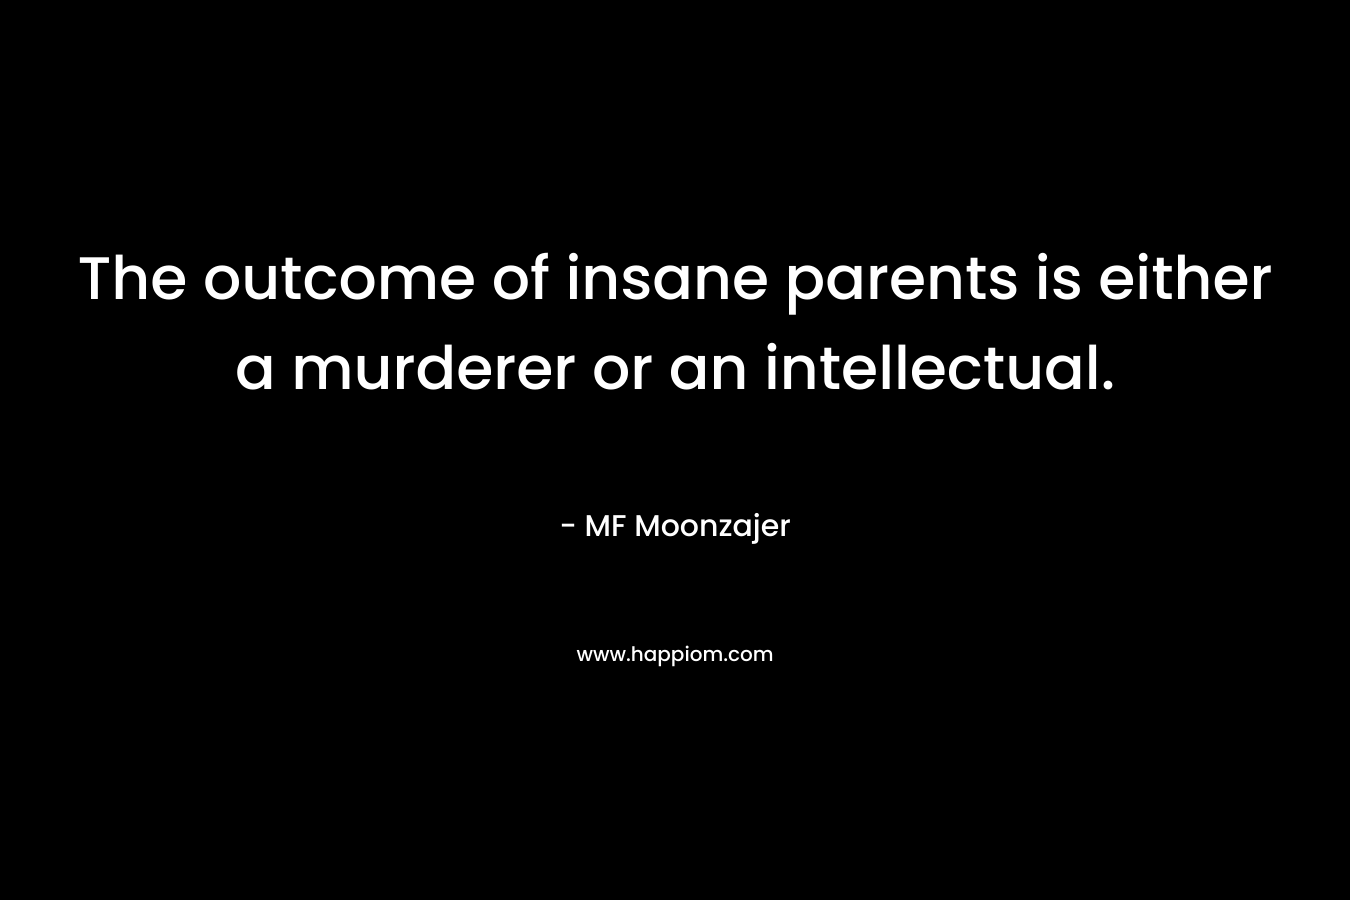 The outcome of insane parents is either a murderer or an intellectual.